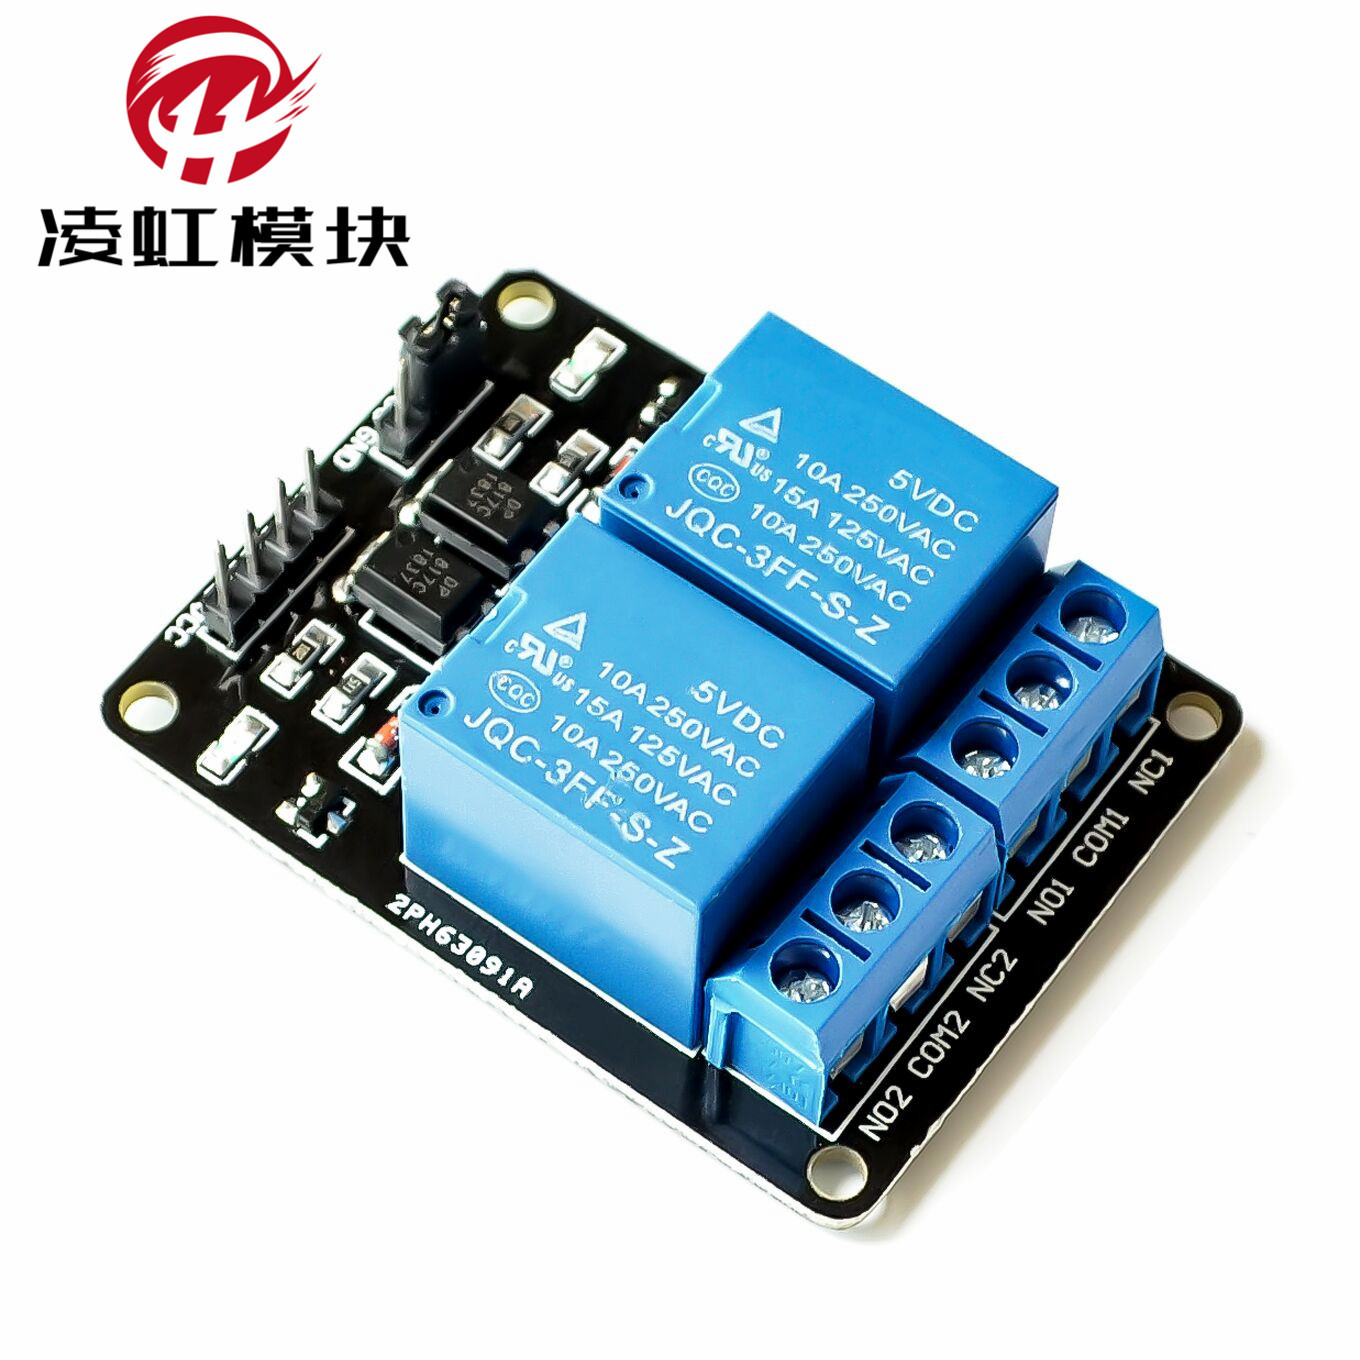 2 way relay module 5V with optocoupler p...